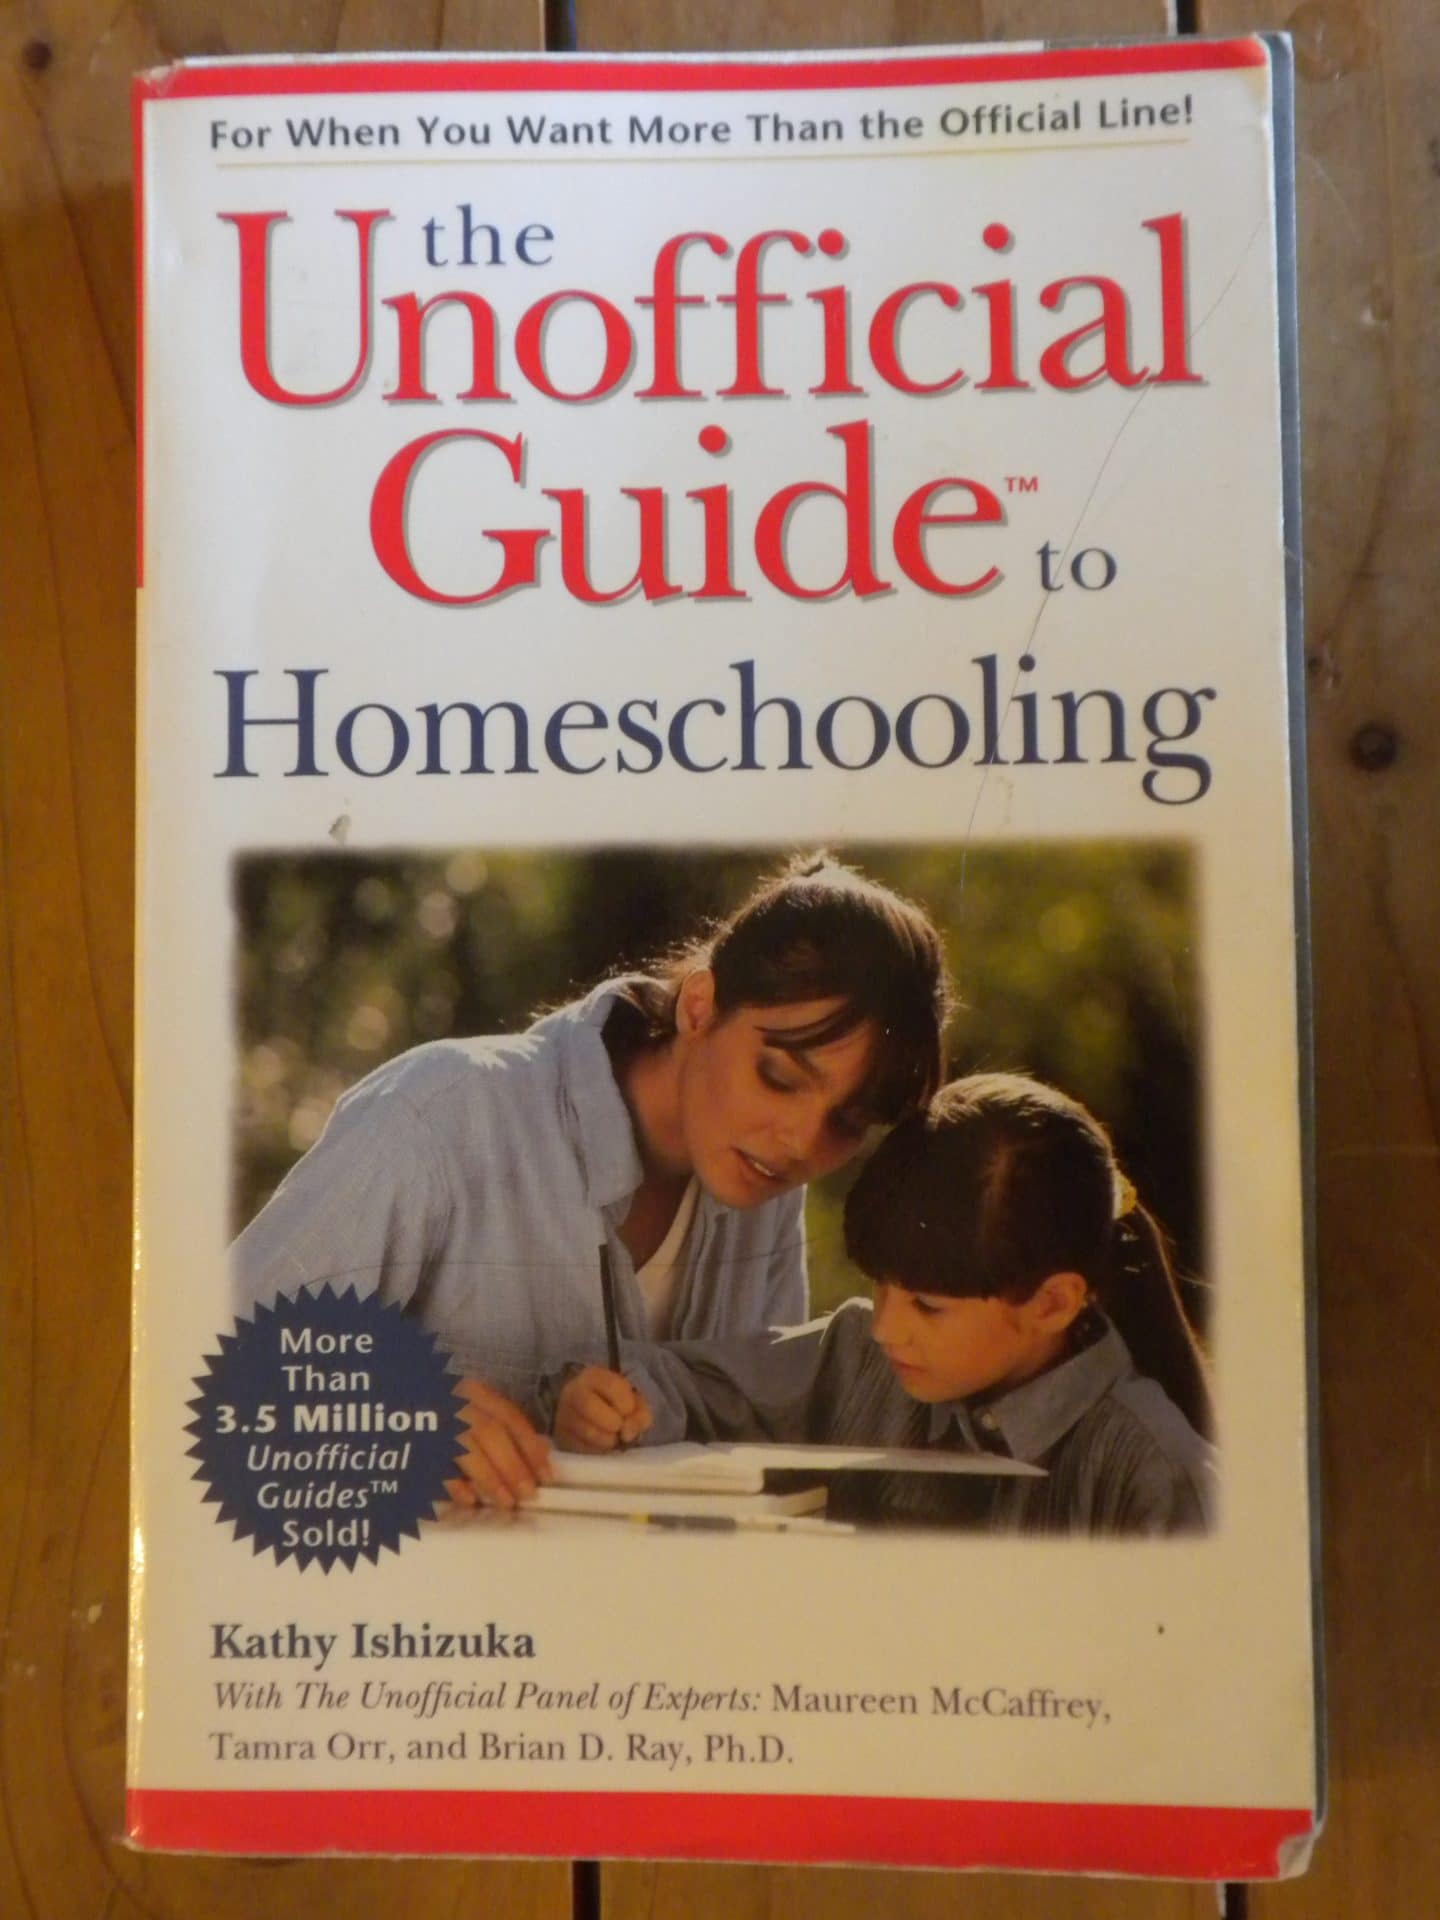 The Unofficial Guide to Homeschooling – My Review